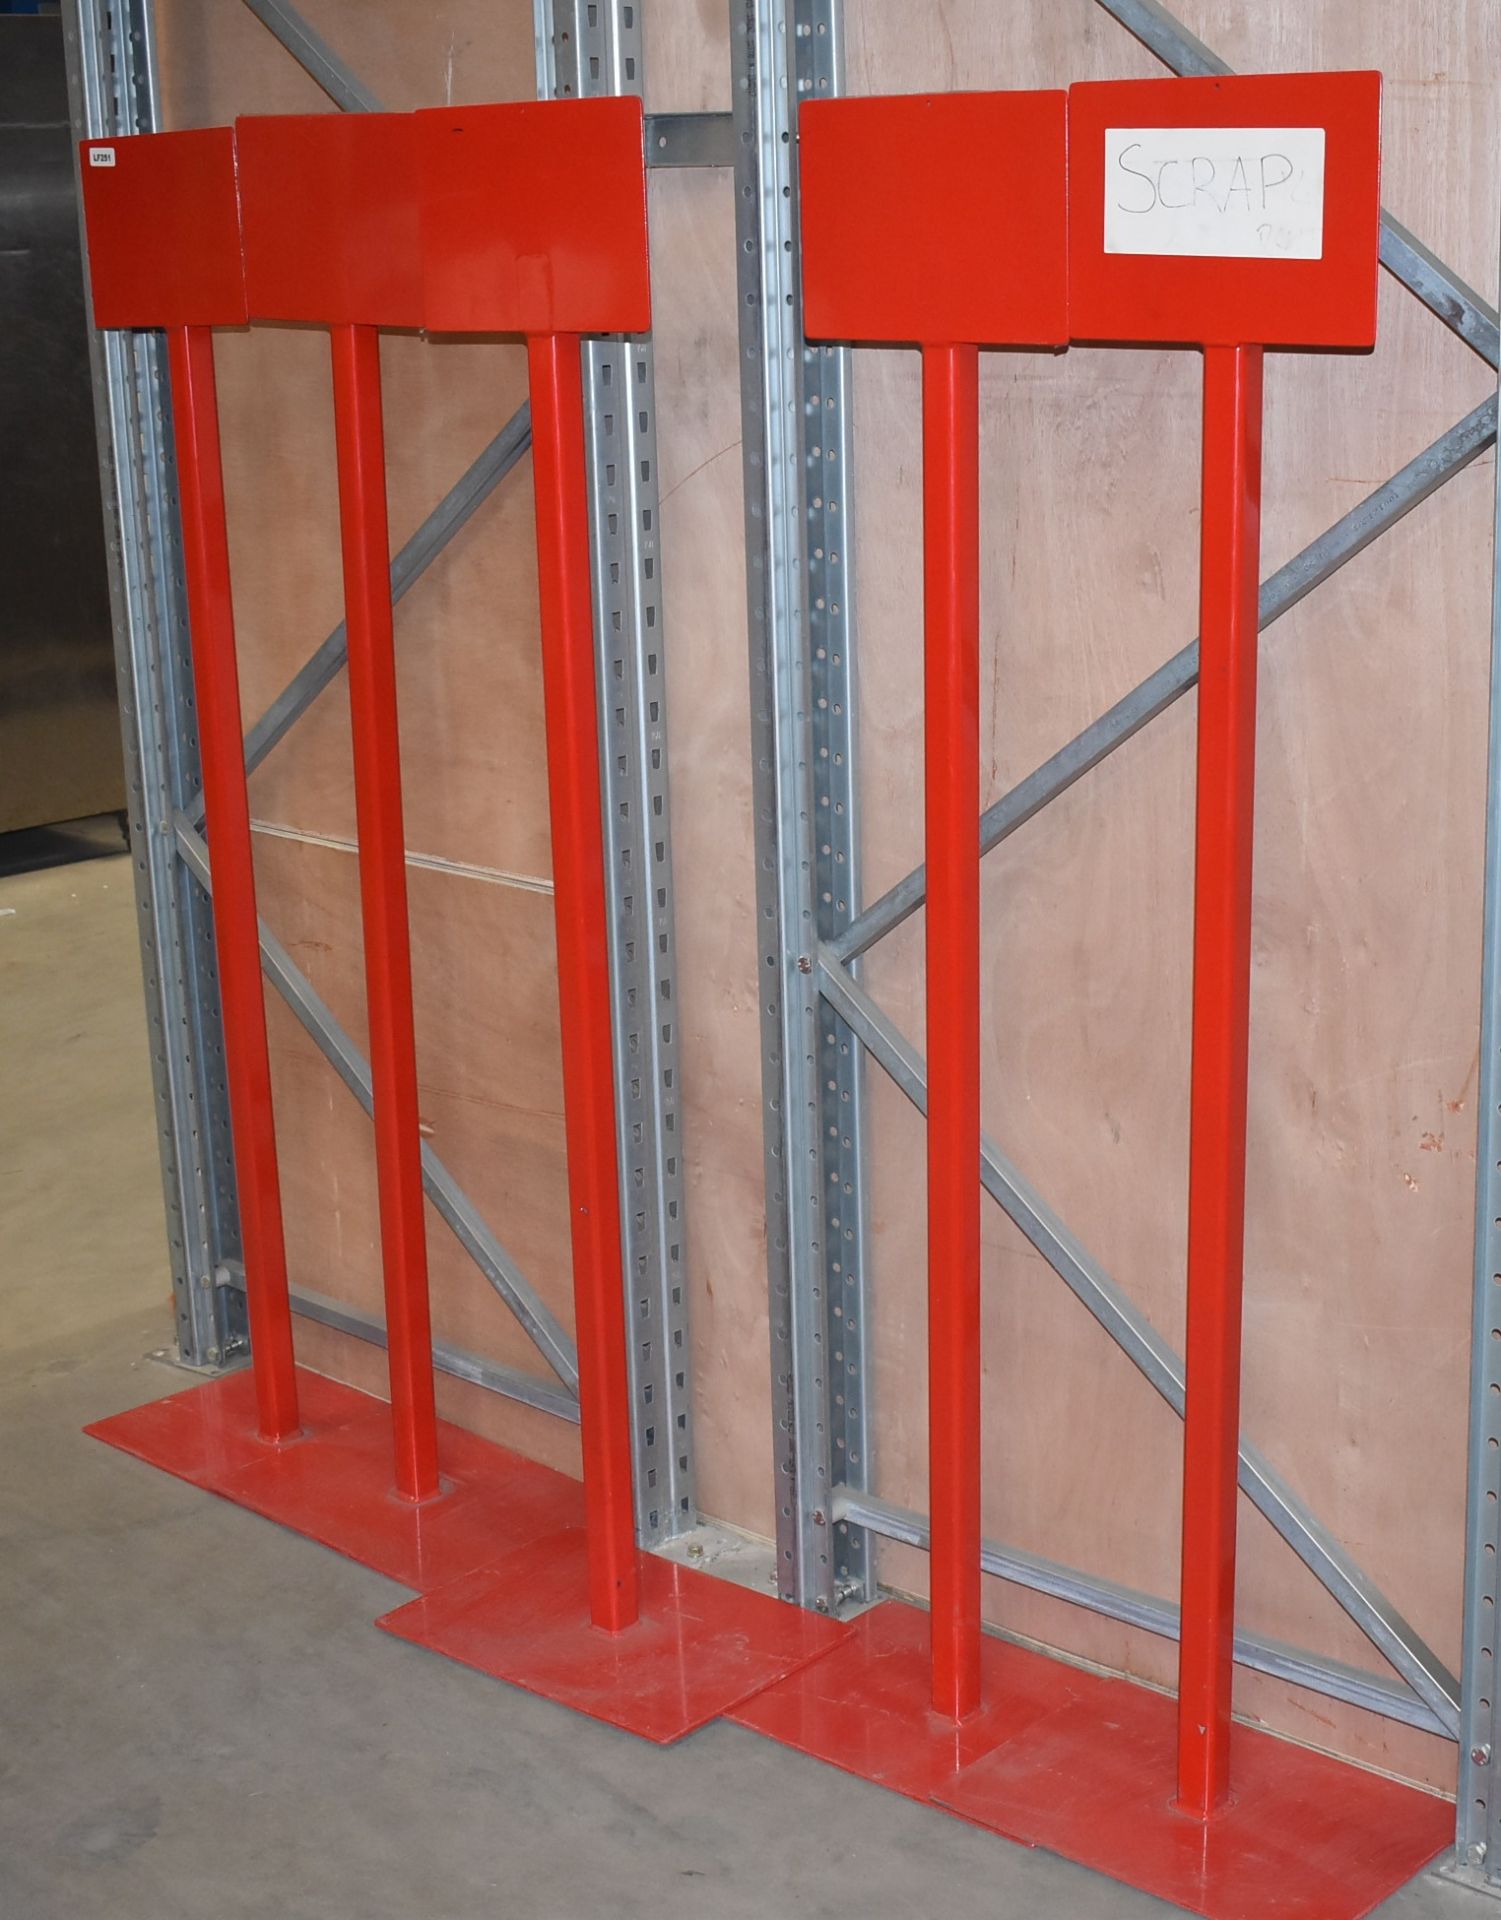 5 x Freestanding Heavy Duty Notice Stands in Red - Ideal For Social Distancing Warning Signs -